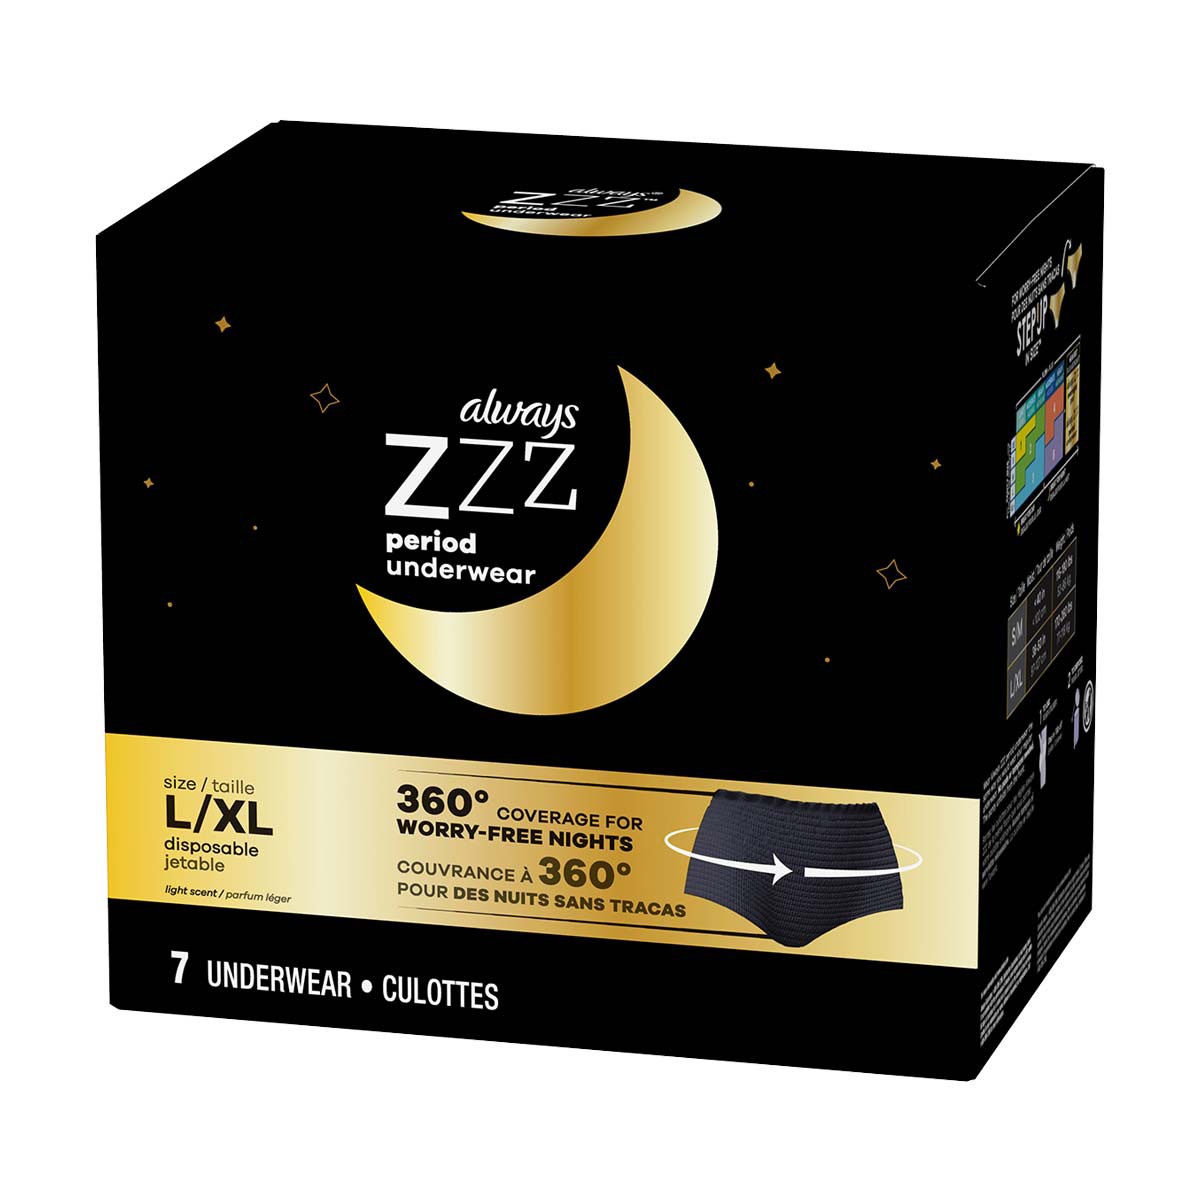  Always Zzzs Overnight Disposable Period Underwear For